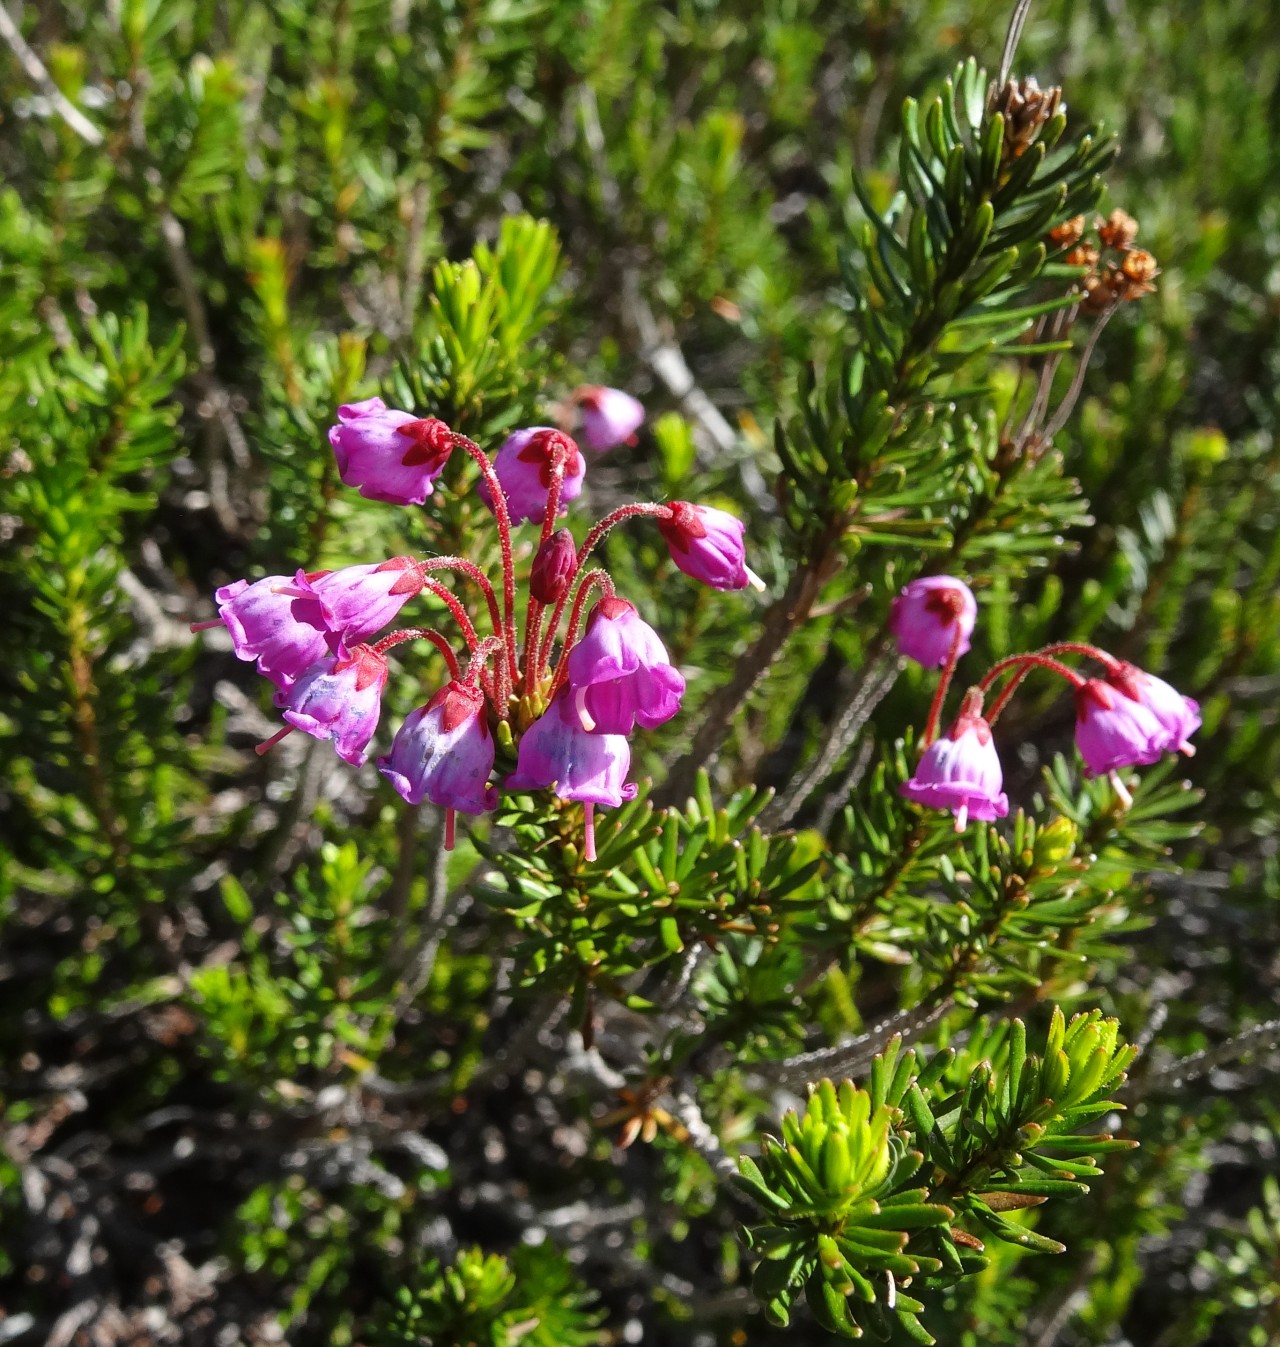 Pink mountain heather, Phyllodoce empetriformis, is a favorite of bees in the western North American mountains. This one was seen on Mount Baker, in Washington State.